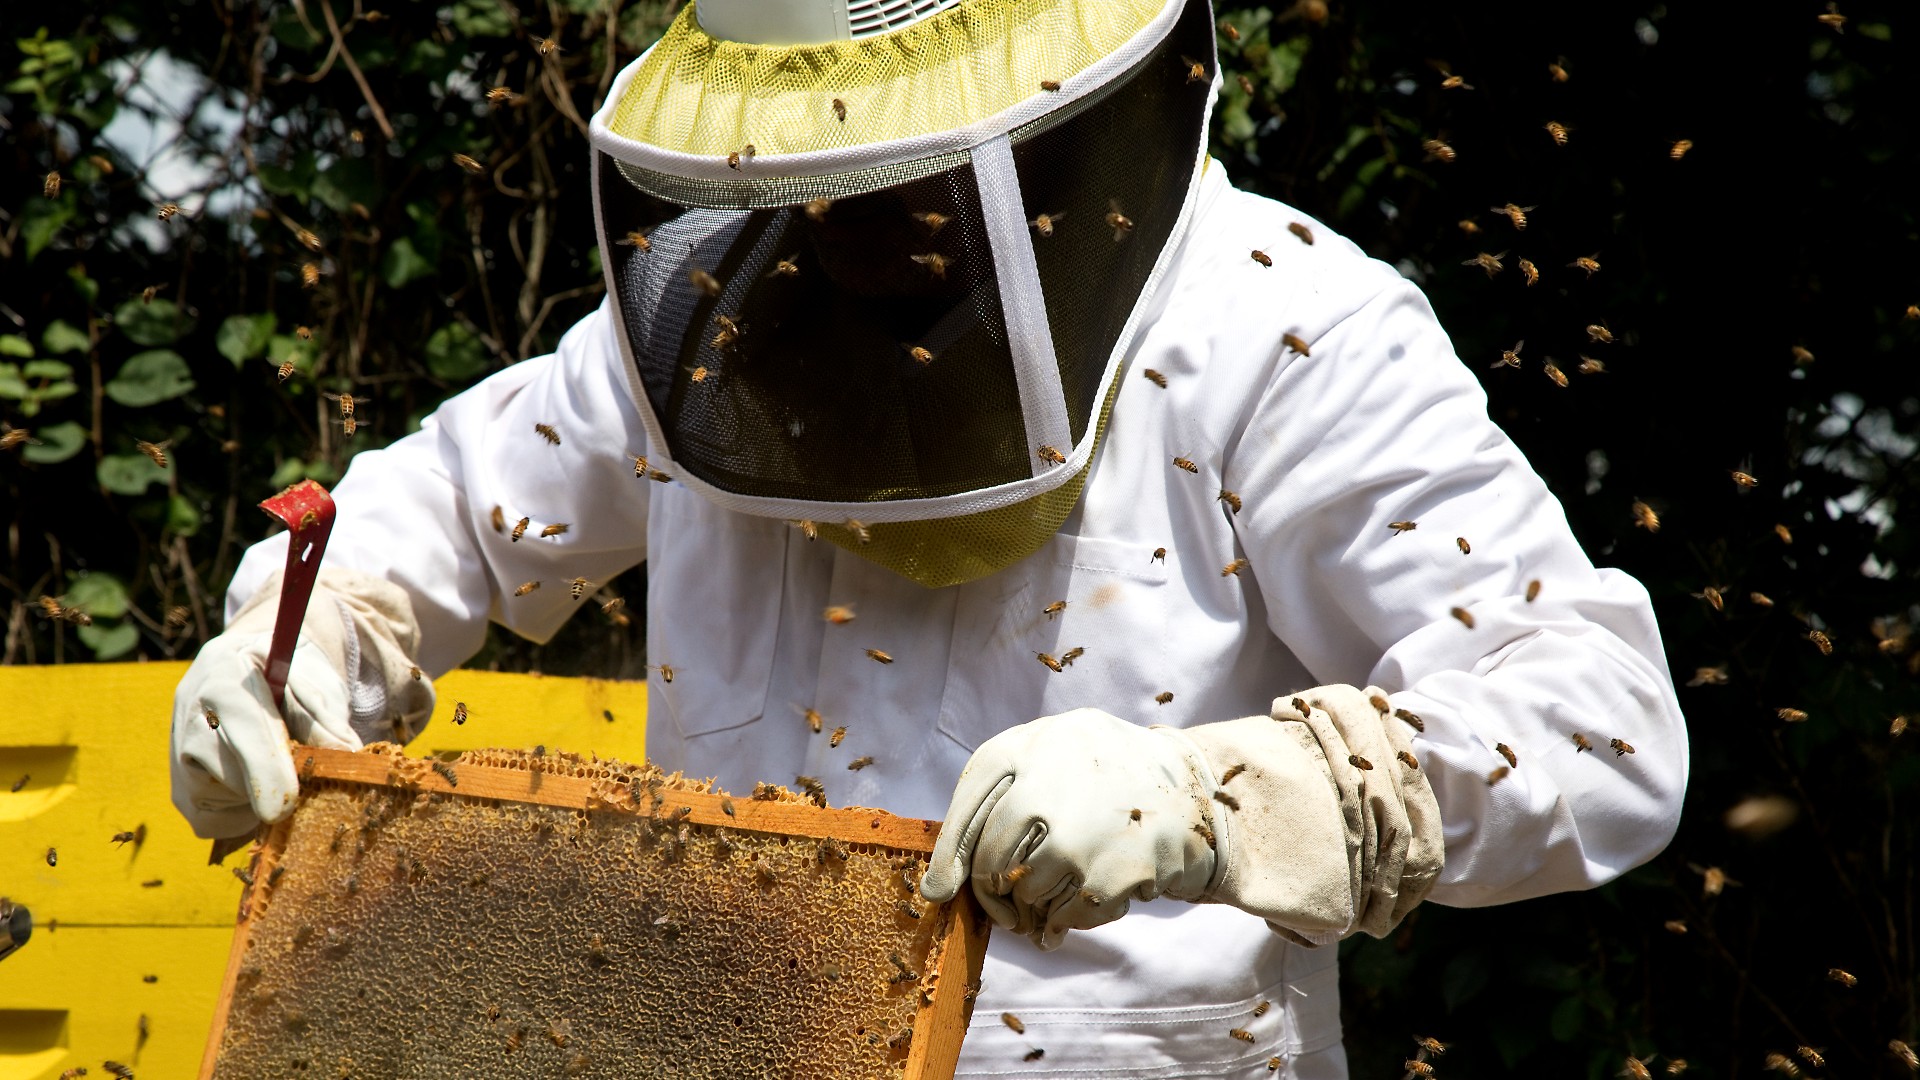 Here you can see the beekeeper wearing a protective white bee suit. They have a beehive in front of them while surrounded by a herd of bees.